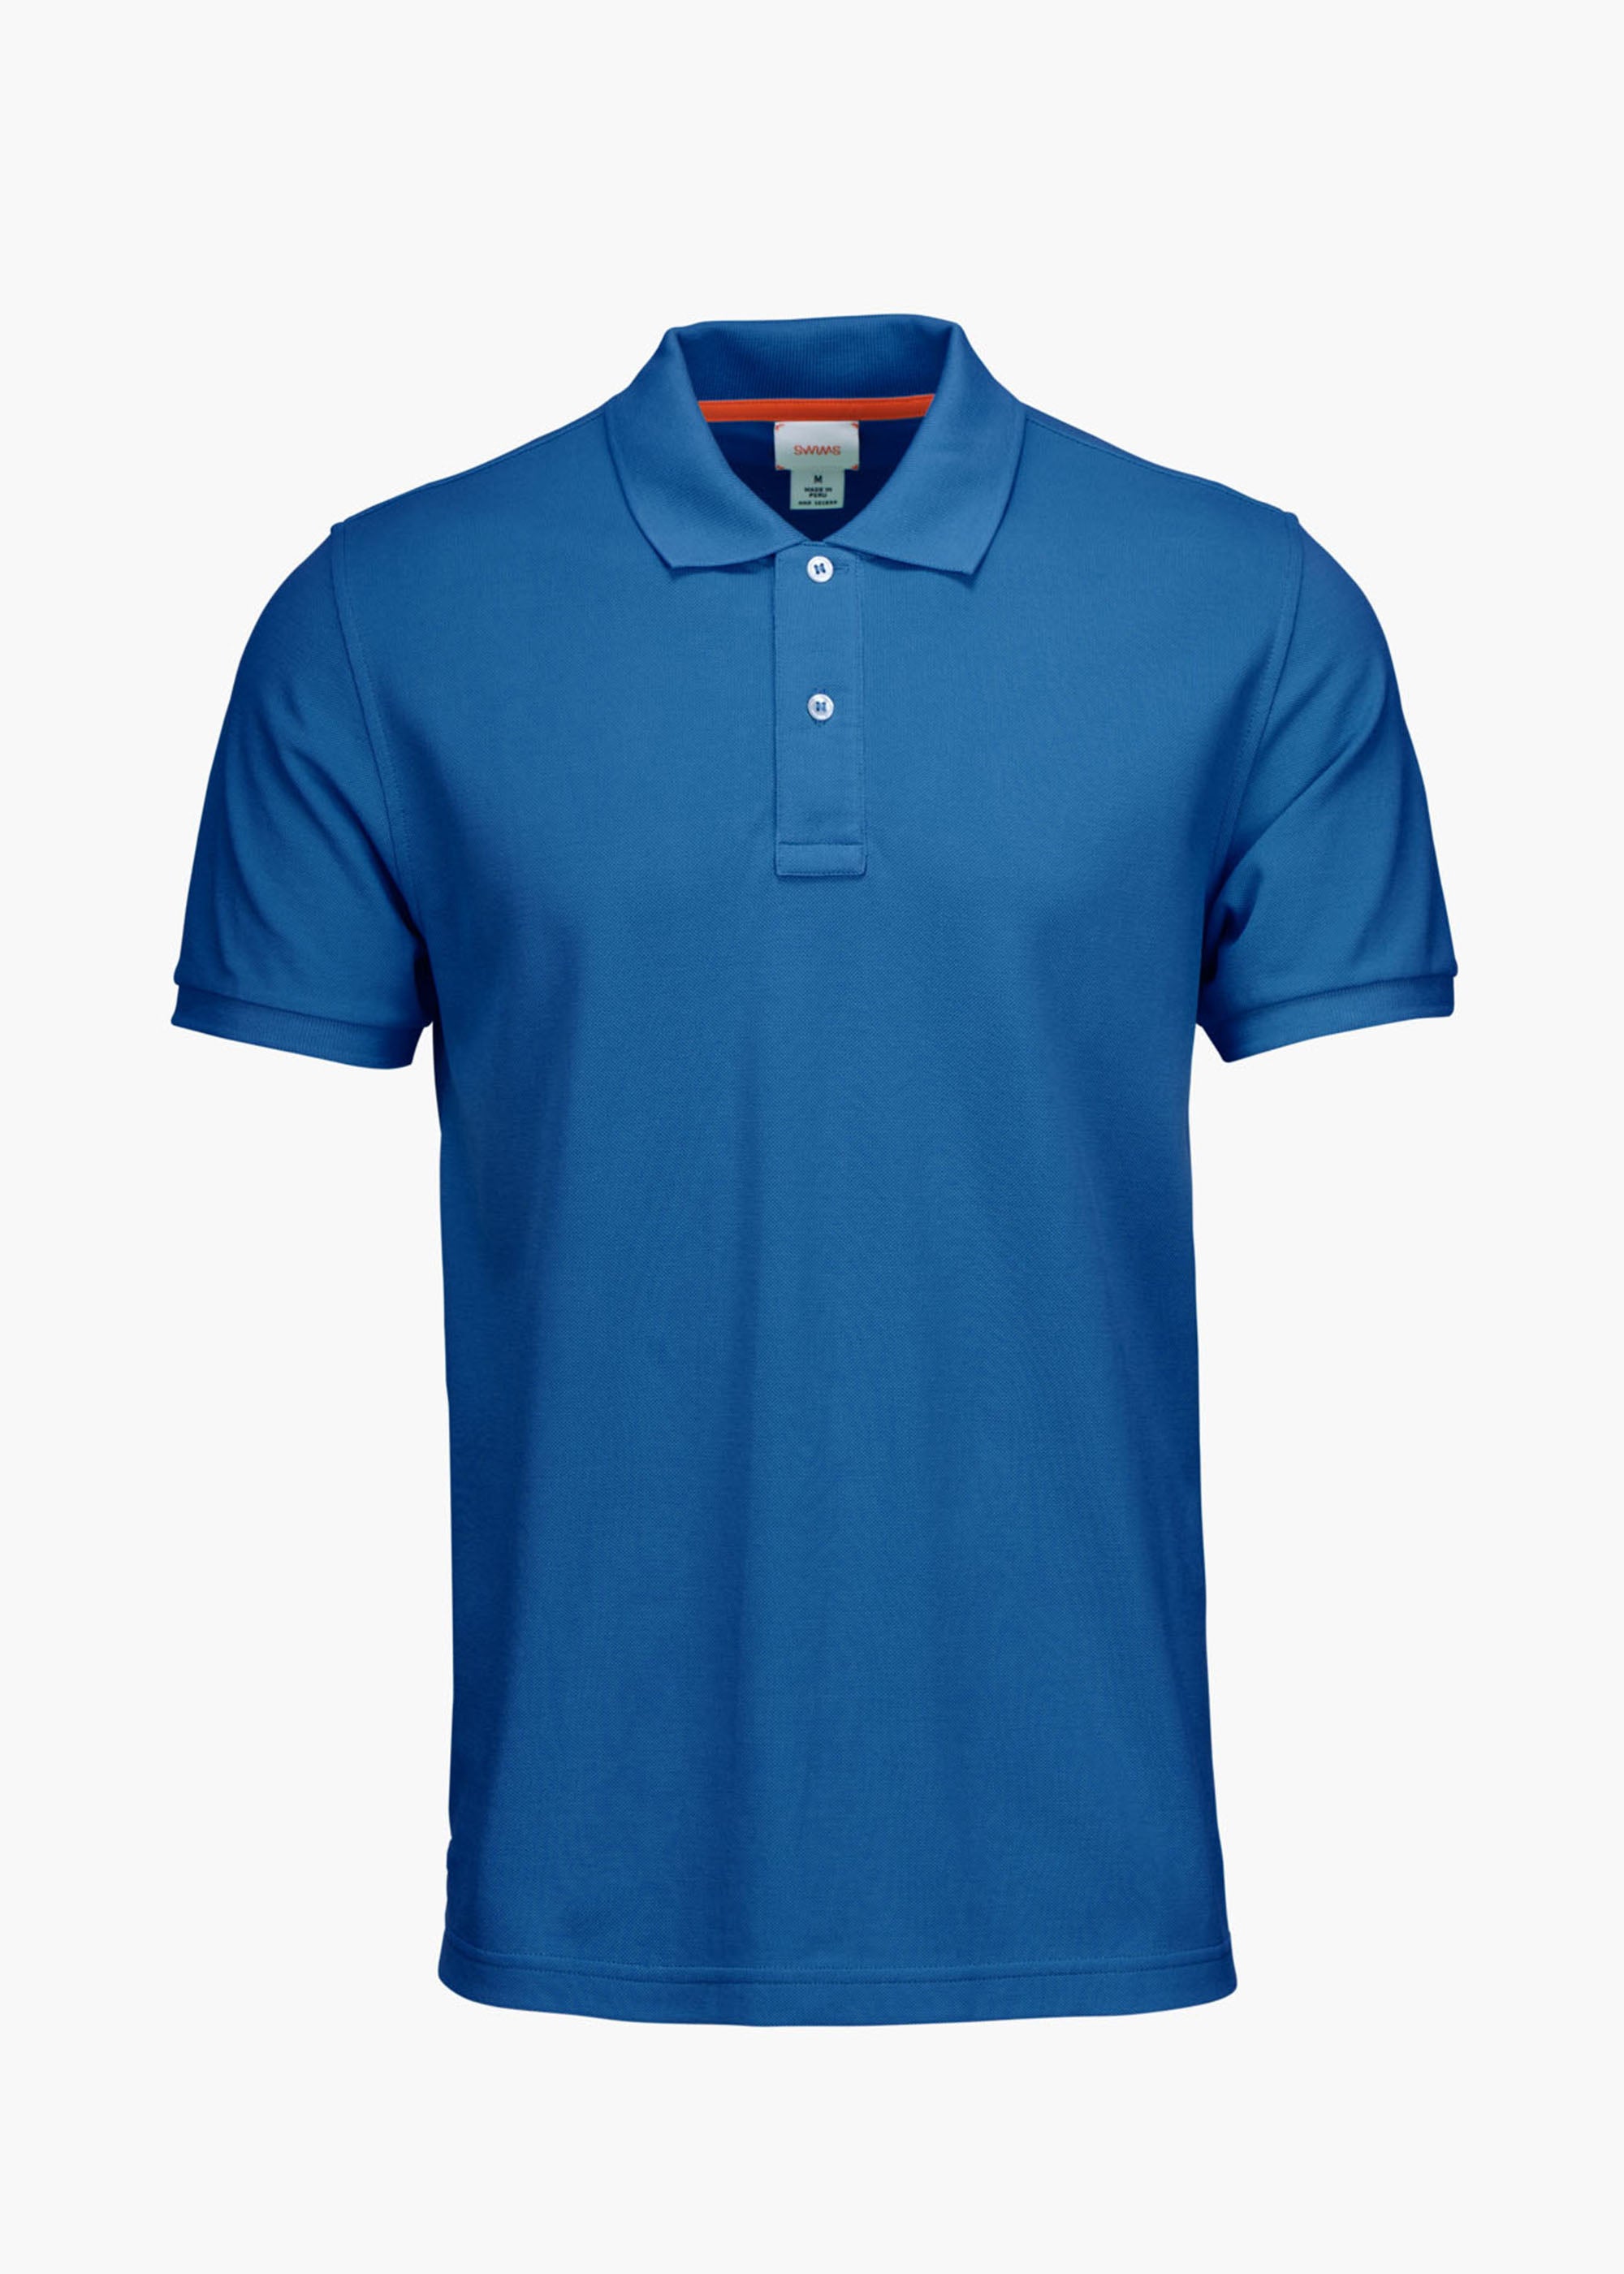 Sunnmore Polo in Ensign Blue for Mens | SWIMS | SWIMS